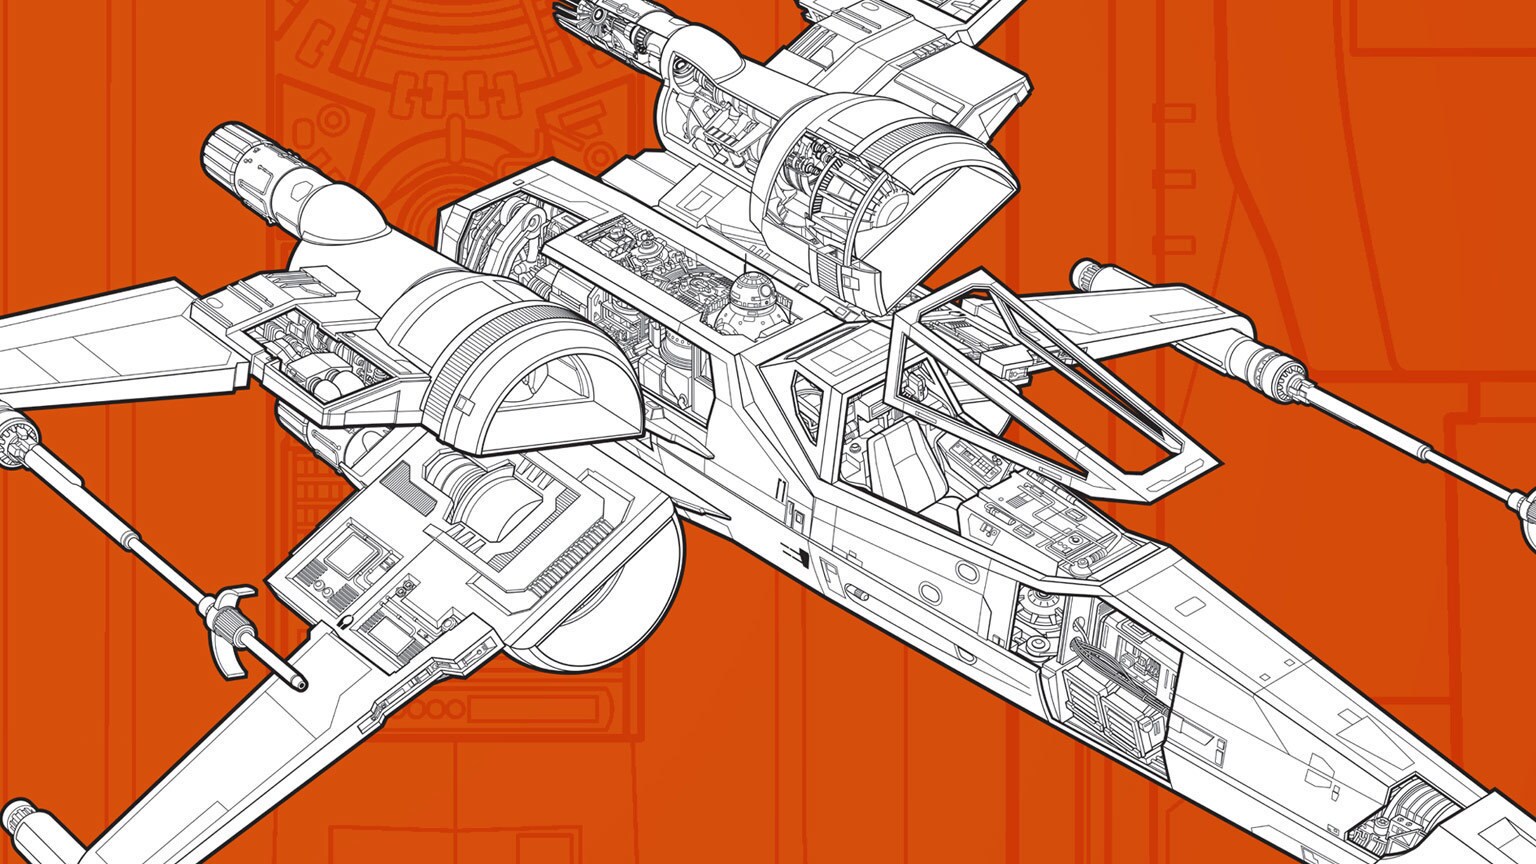 See the New Y-Wing from Star Wars: The Rise of Skywalker and More in Rebel Starfighters Owners' Workshop Manual - Exclusive Preview